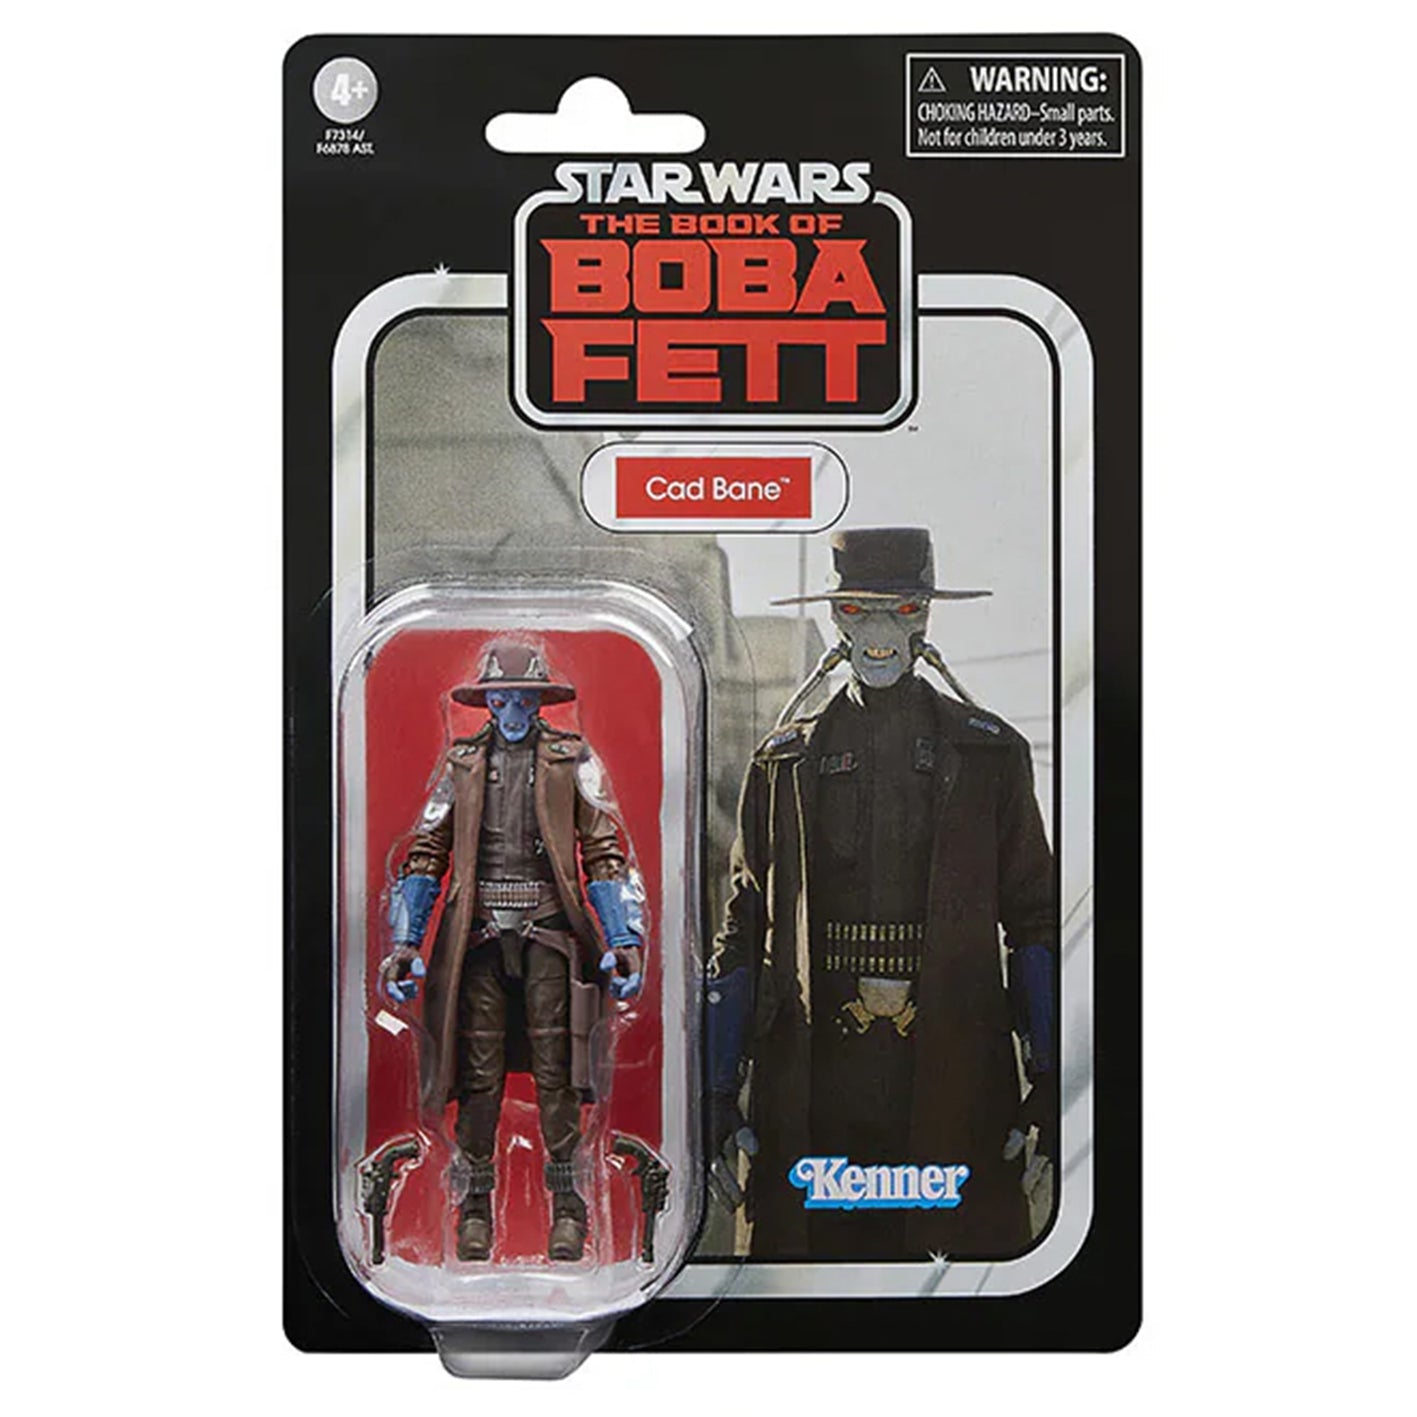 Cad Bane (The Book of Boba Fett), Star Wars The Vintage Collection